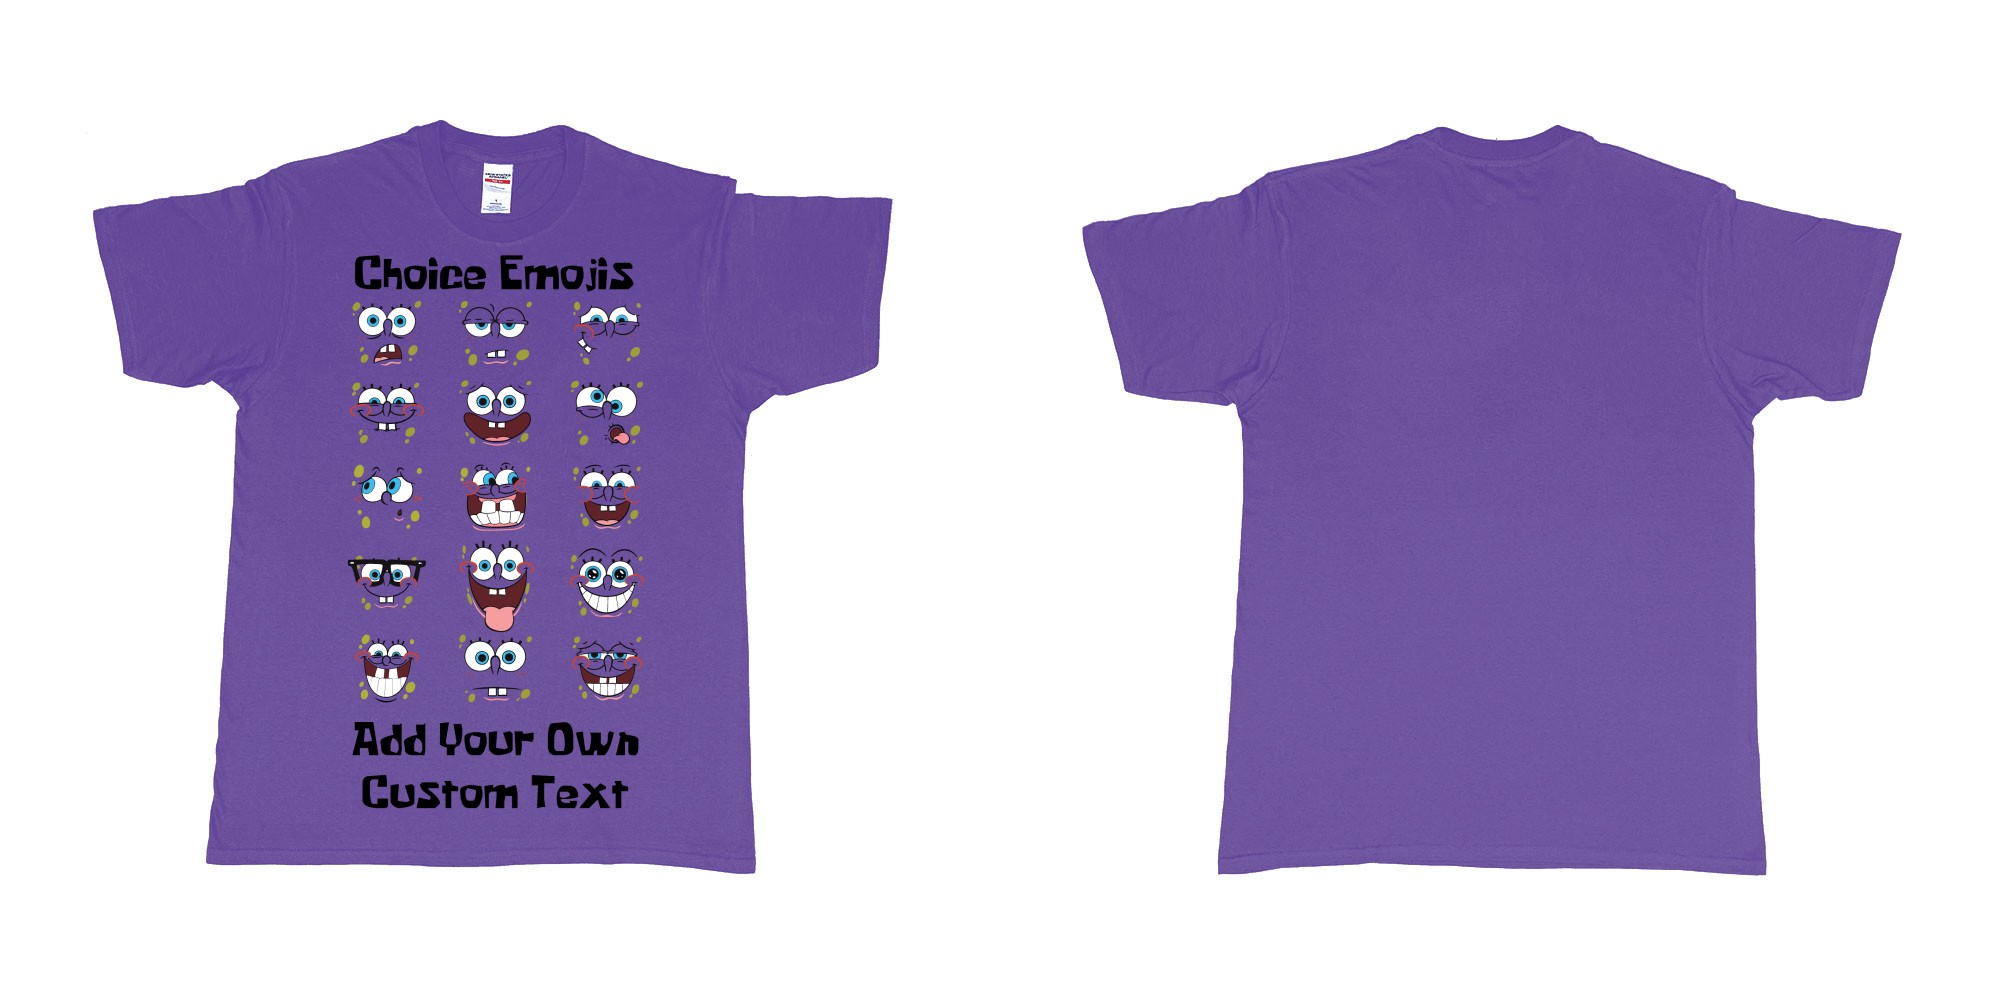 Custom tshirt design spongebob squarepants many faces emojis custum printing in fabric color purple choice your own text made in Bali by The Pirate Way